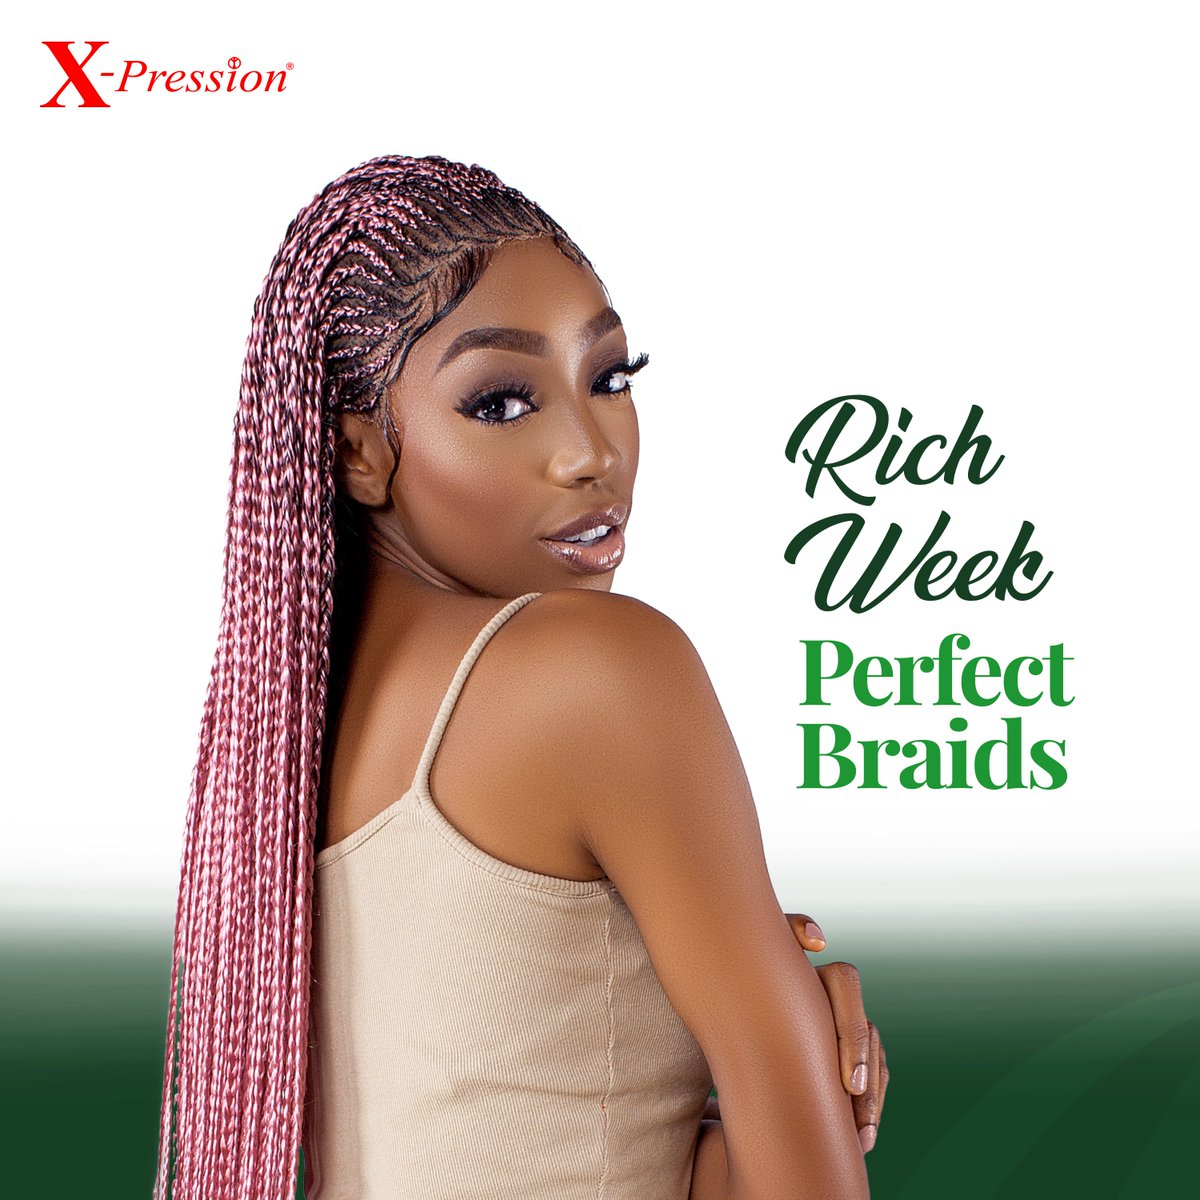 Transform your look with RICH Braid – the unrivaled choice for achieving stunning hairstyles all week long! 🌟 Whether you're going for sleek sophistication or bold creativity, RICH Braid offers unparalleled versatility and quality. #xp4you #xpression #richbraid